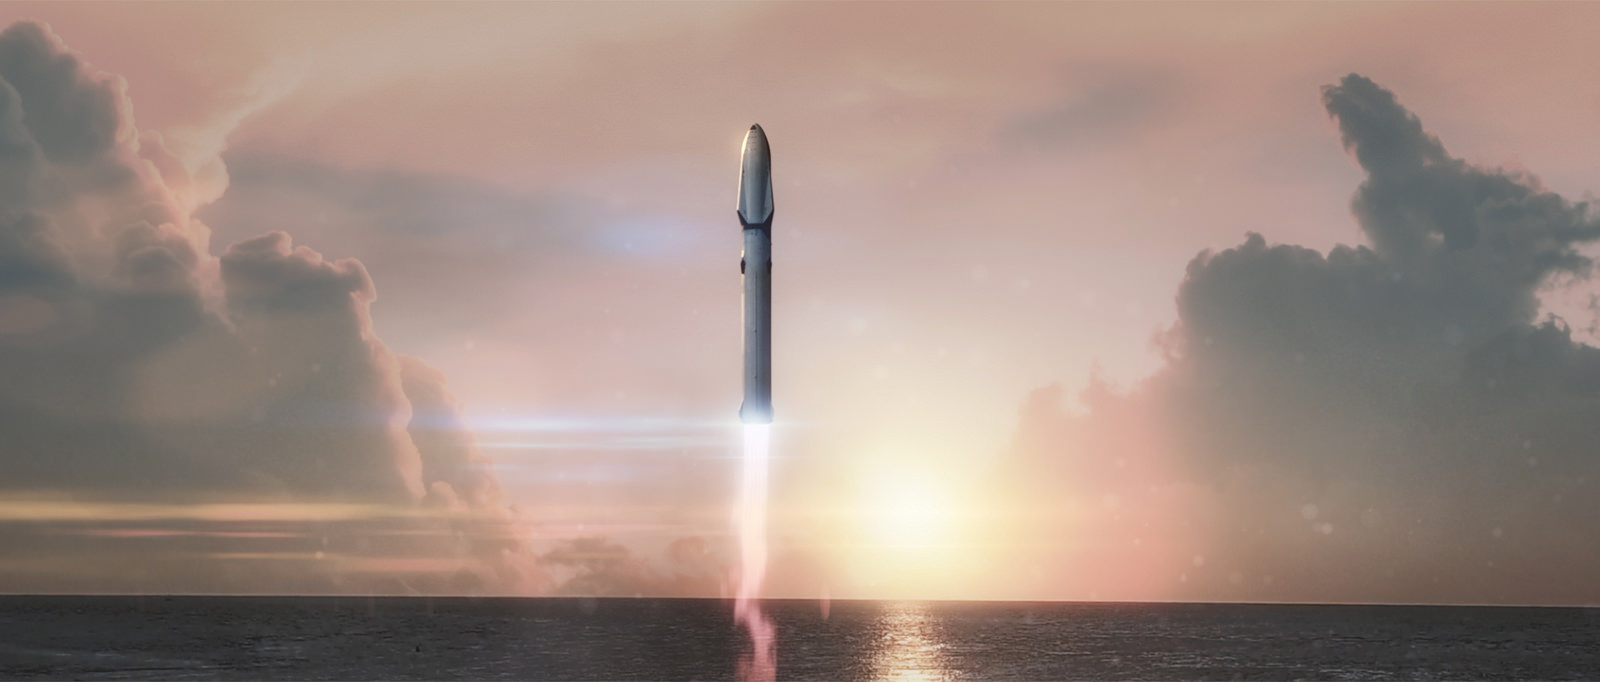 [SpaceX/Flickr]